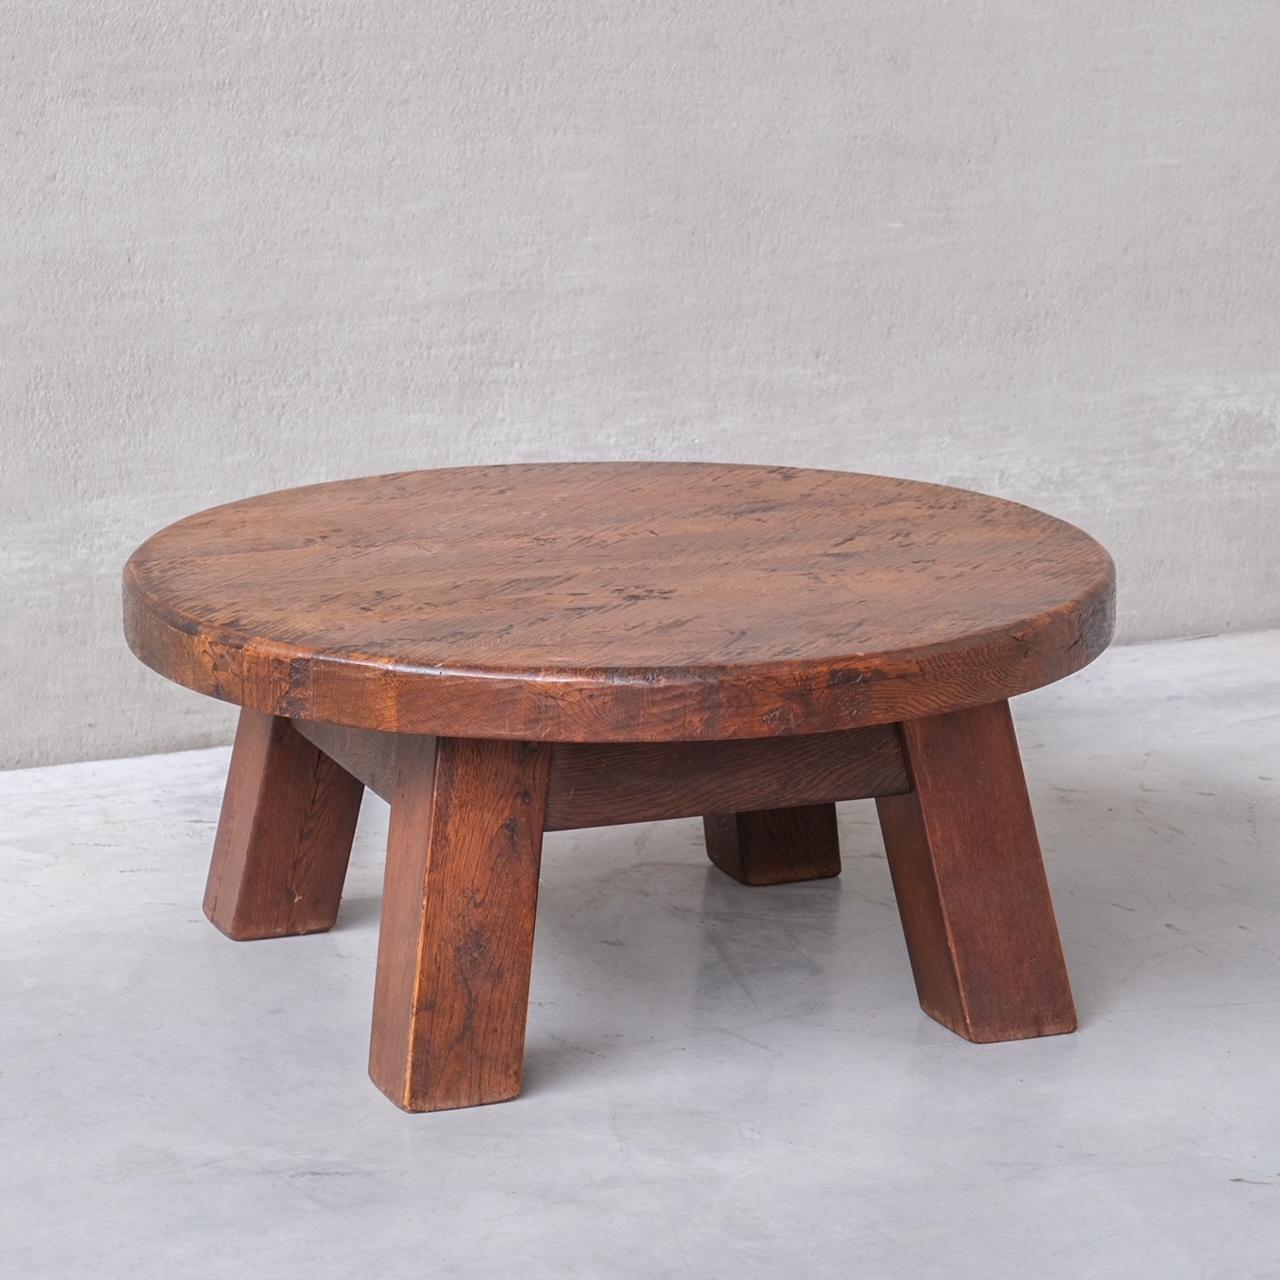 A Brutalist oak coffee table.

Holland, circa 1970s.

Primitive chunky construction.

Good condition.

Internal Reference: 284/CT001

Location: Belgium Gallery.

Dimensions: 98 Diameter x 44 height in cm.